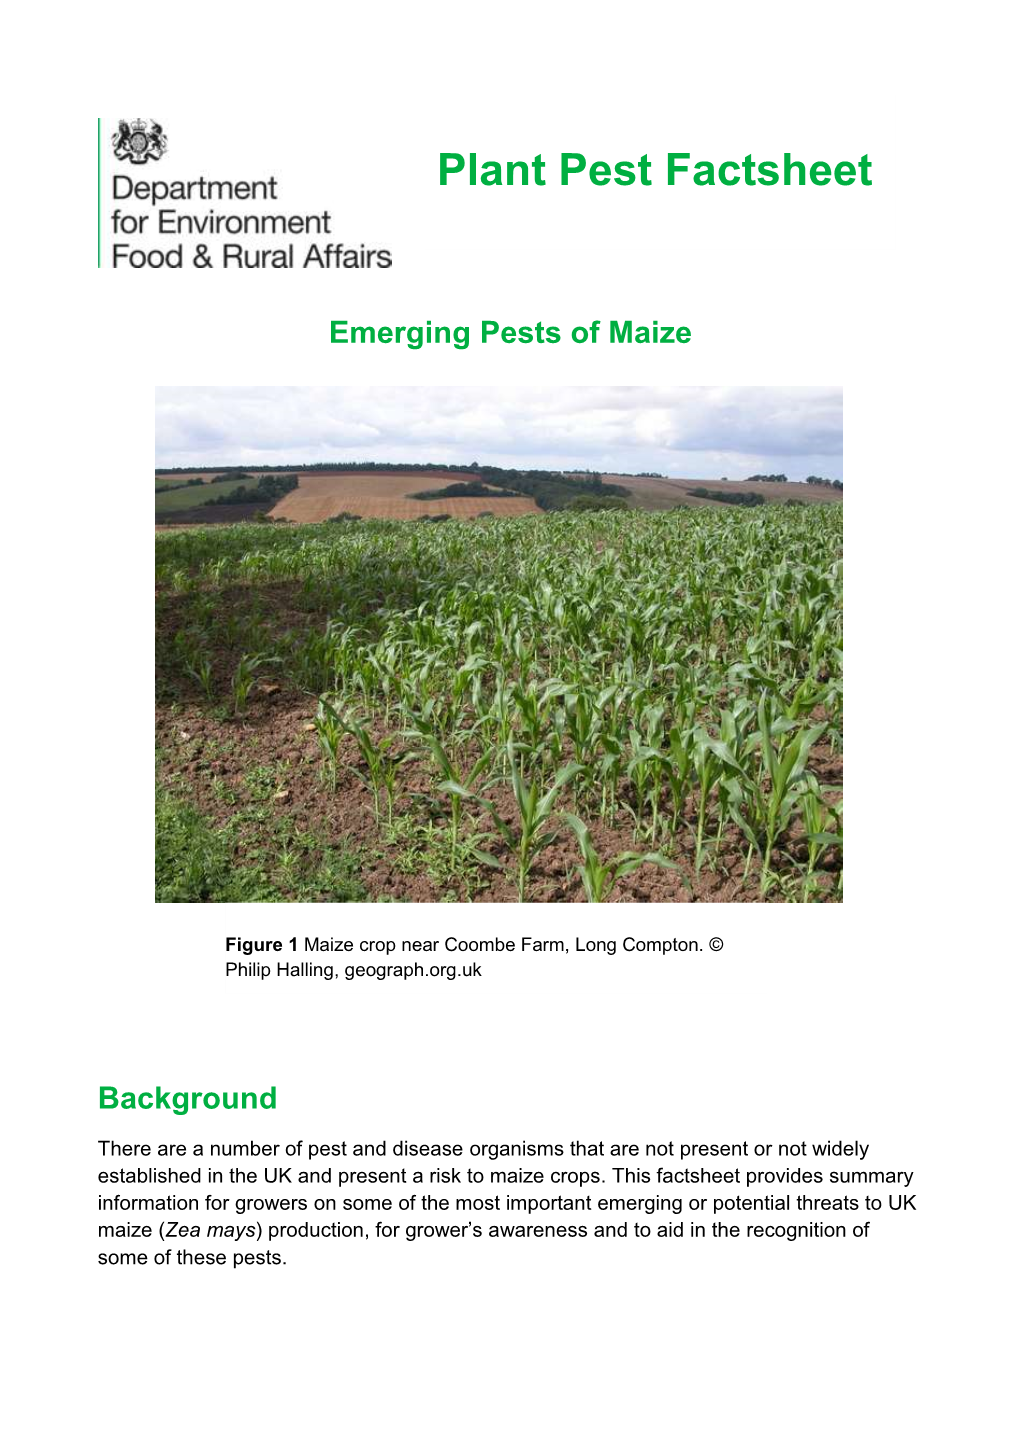 Emerging Pests of Maize